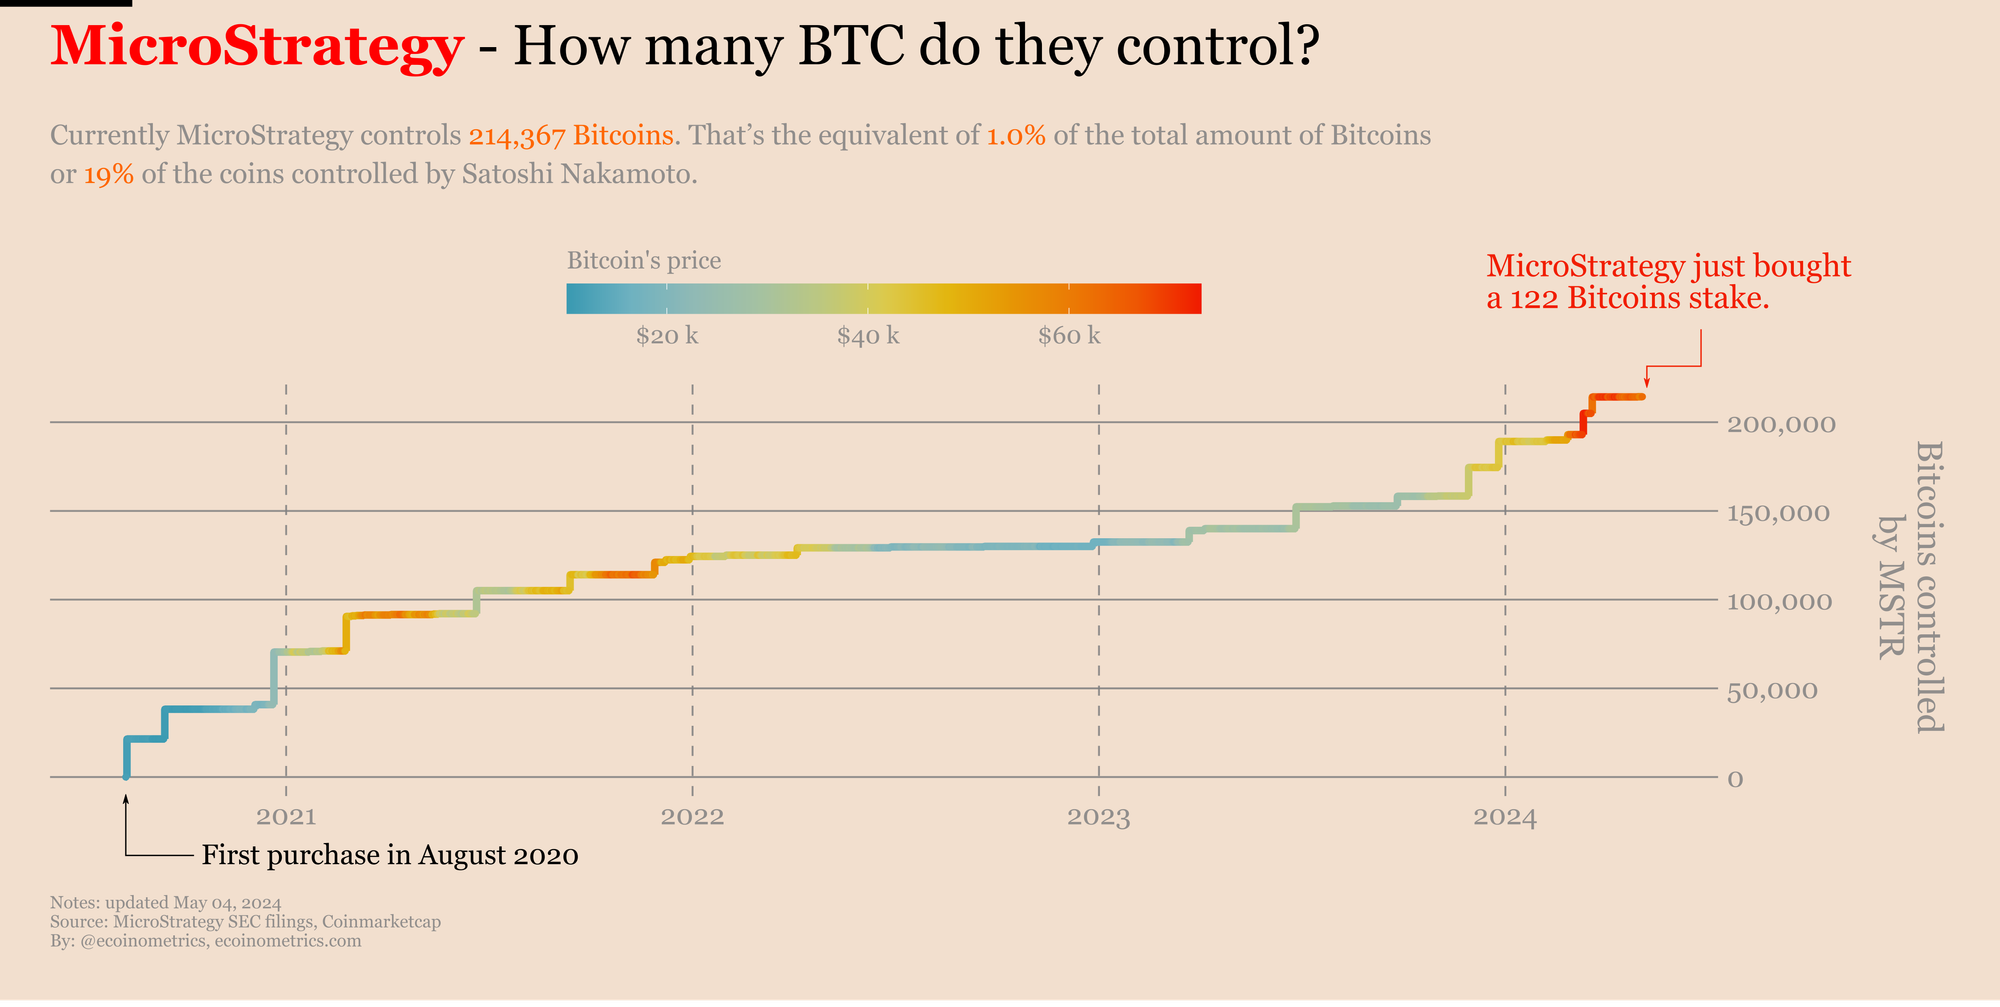 How many Bitcoins does MicroStrategy control?